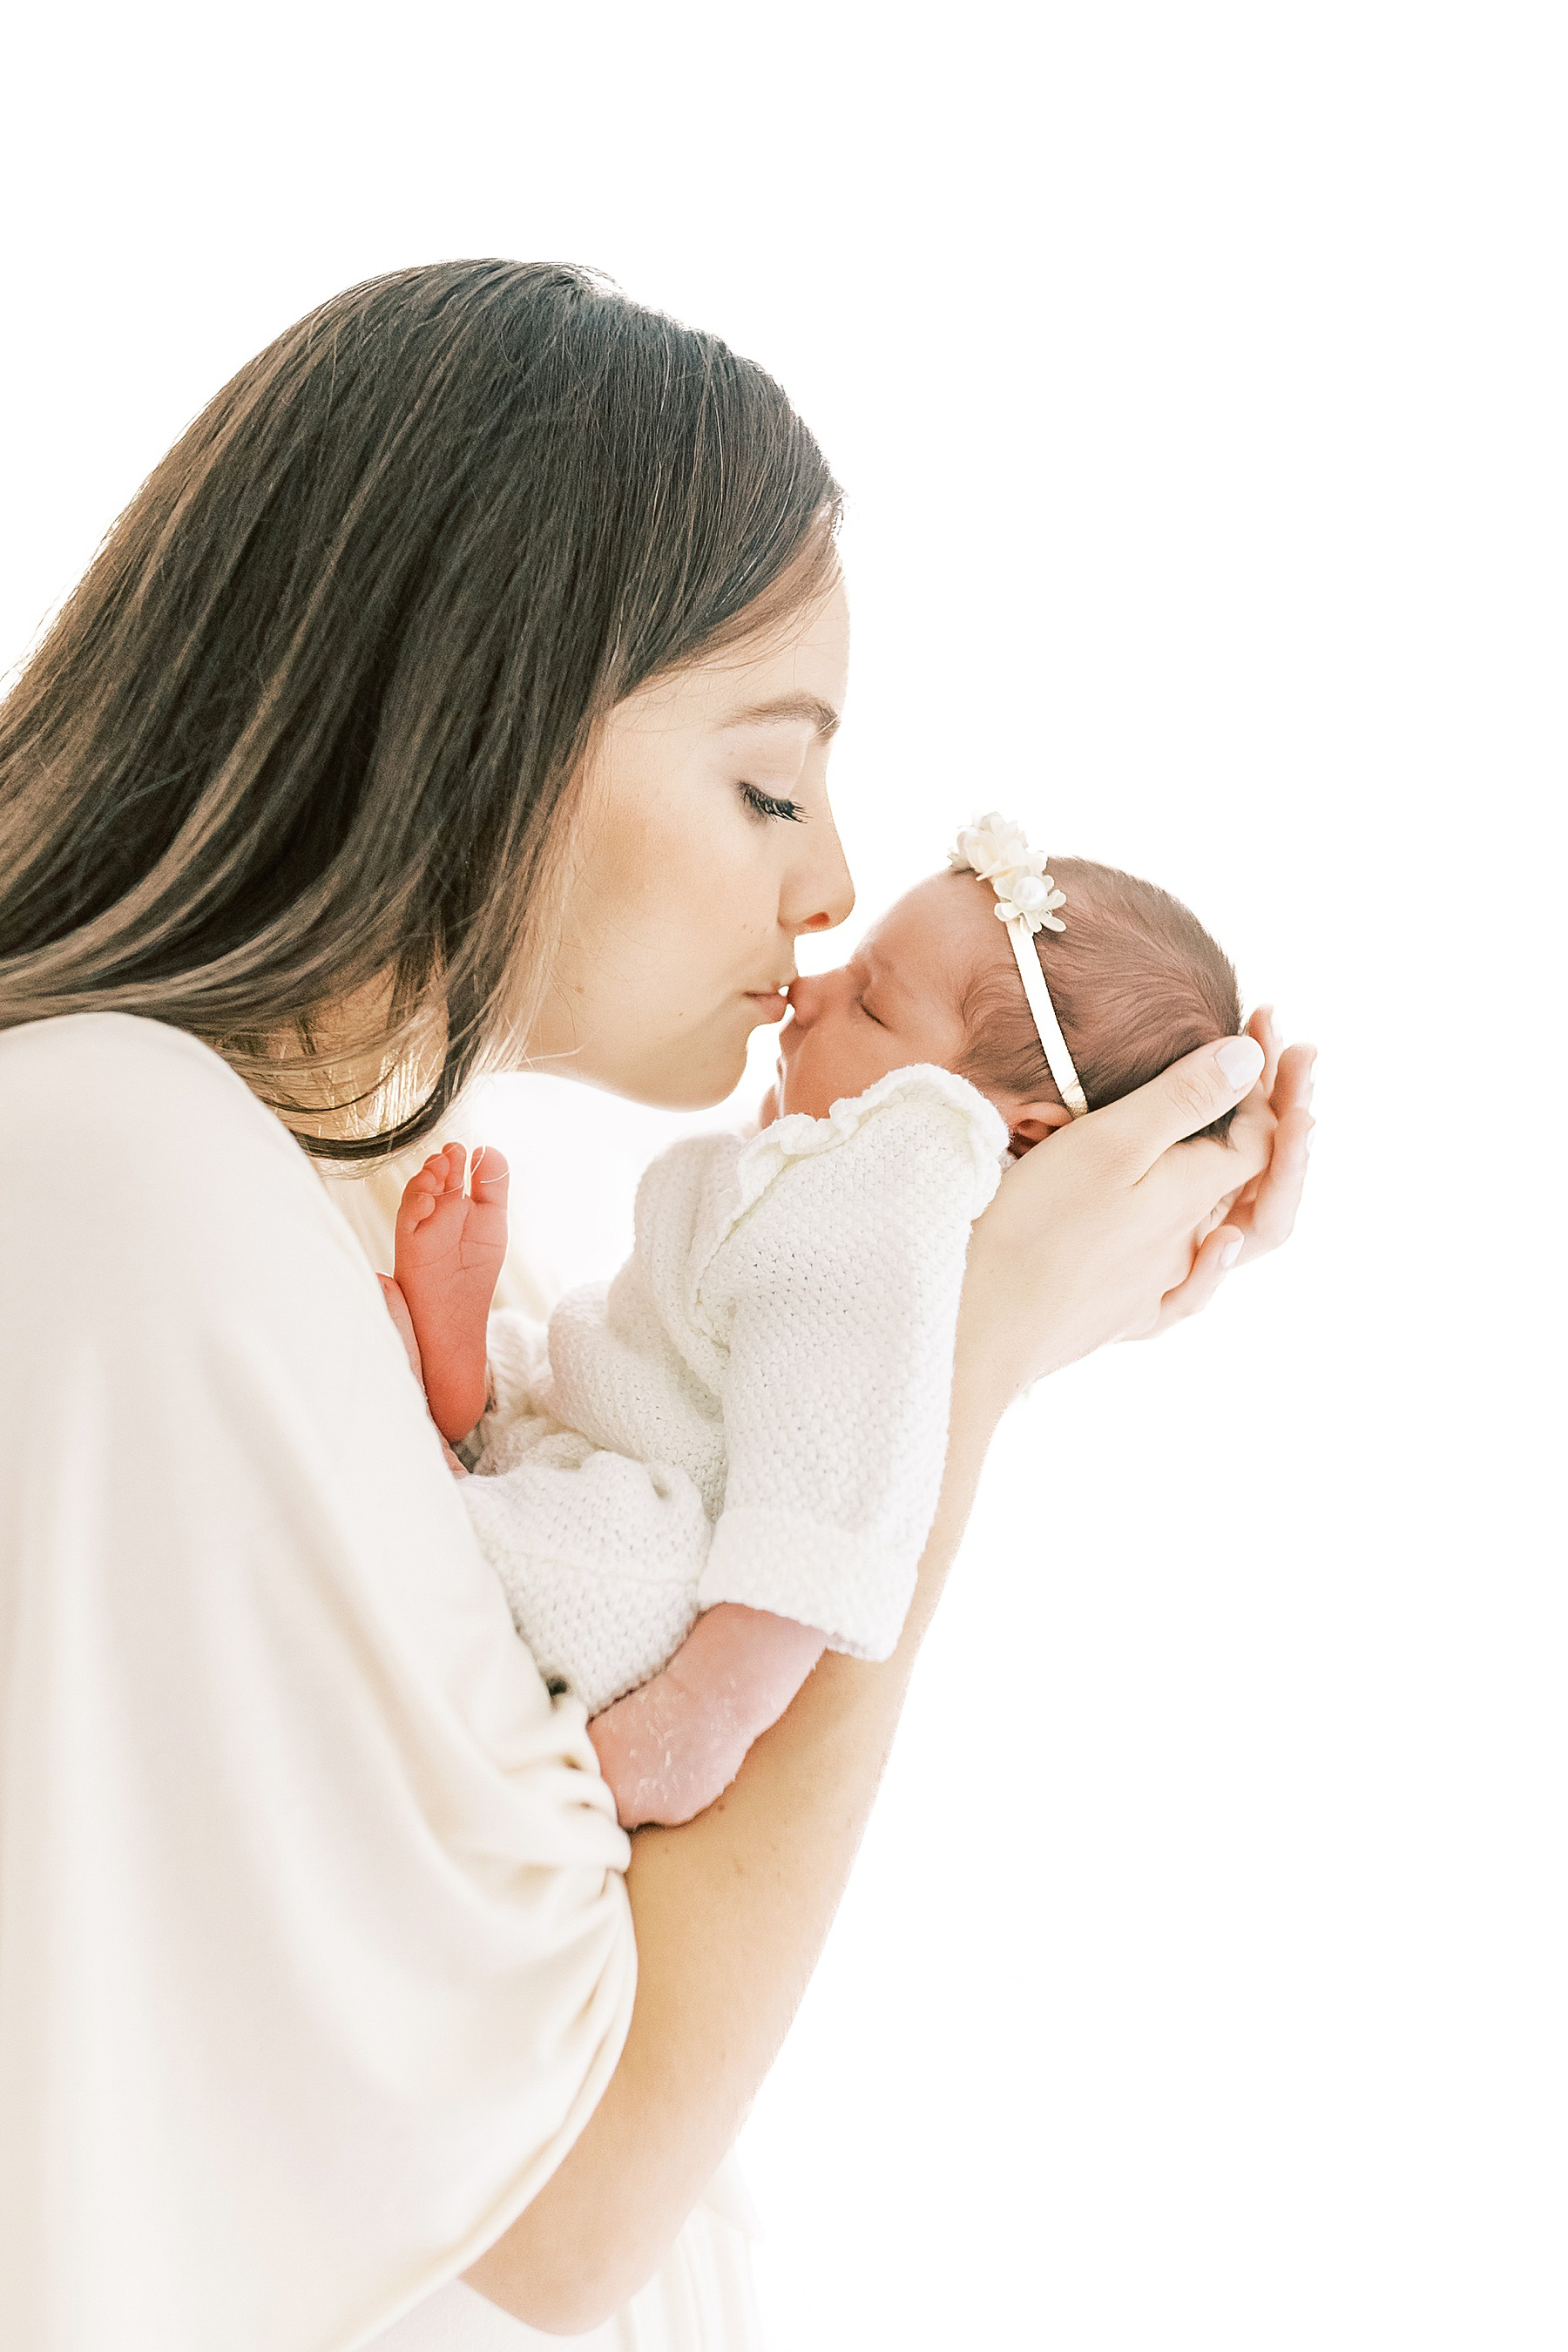 woman in cream long dress standing against white sheer curtains kissing newborn baby girl on the nose